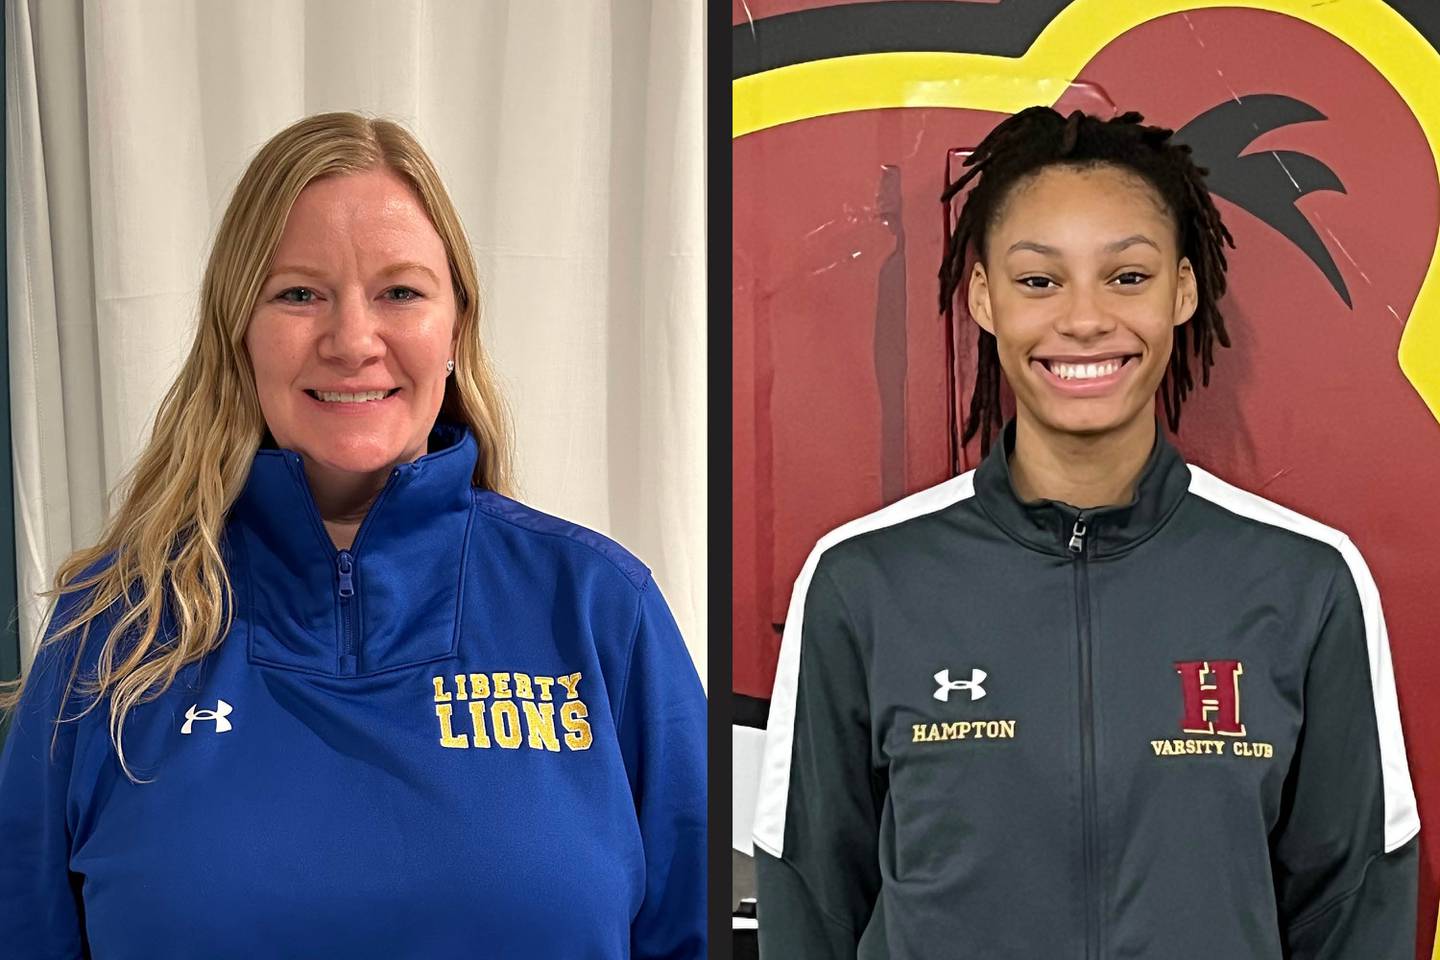 From left: Volleyball Coach of the Year: Sheri Hagen; Volleyball Player of the Year: Safi Hampton